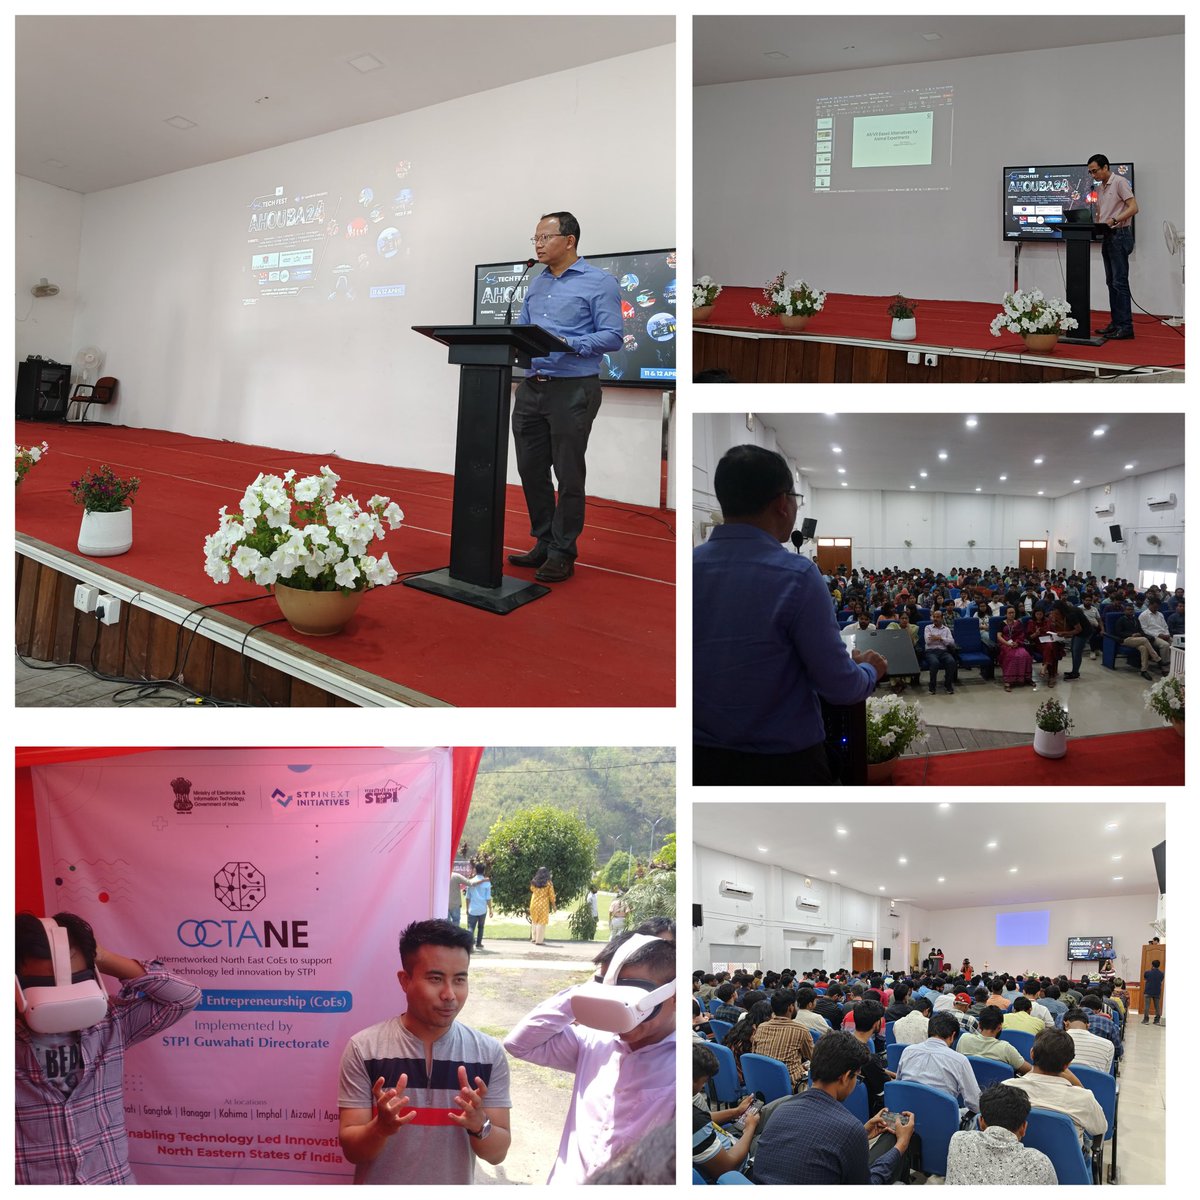 STPI-Imphal highlighted about significance of #STPIINDIA #OctaNE #CoE #EmergingTech in #AR/#VR & Lab Facility during the #TechFest #AHOUBA24 organized by IIIT Manipur with the theme 'TechNext: Pioneering the Future'. @arvindtw  @MSH_MeitY @stpiindia @Vandana030870 @IIITManipur